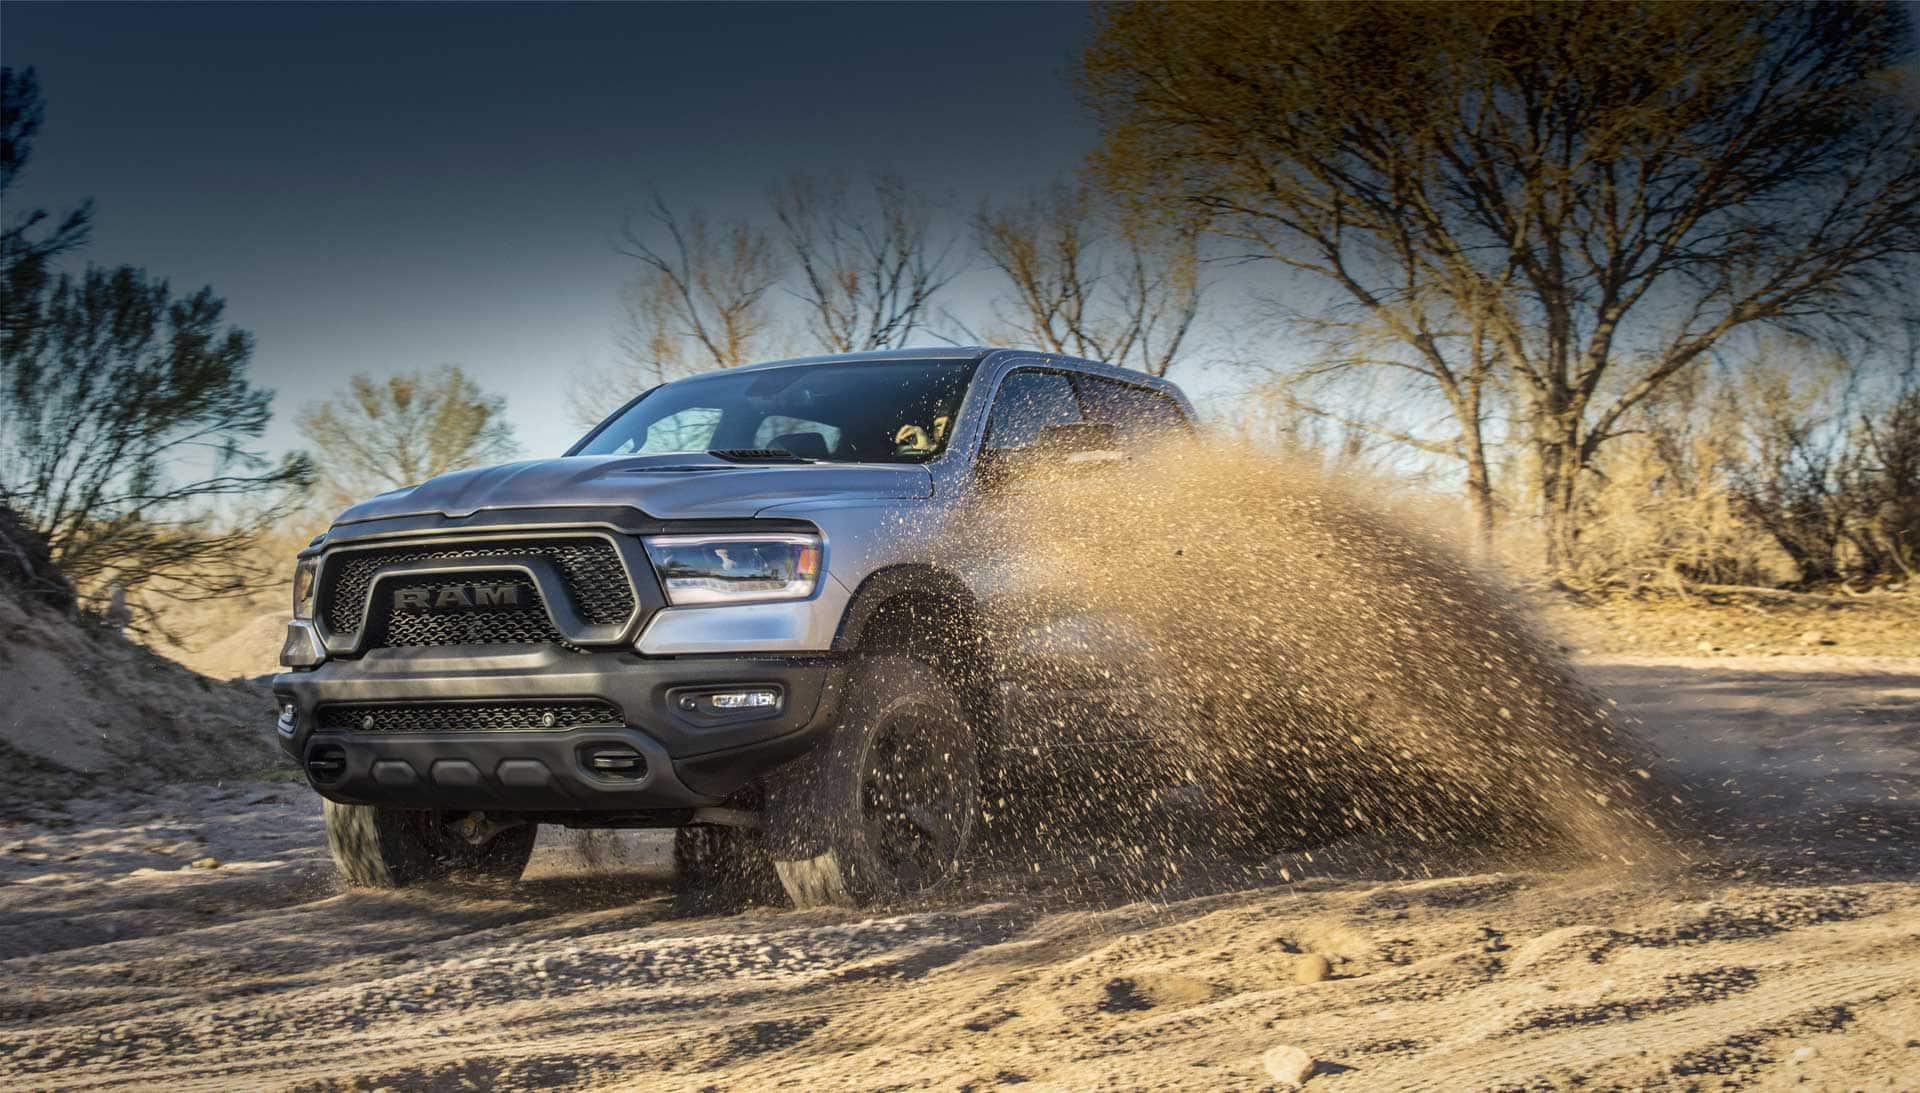 The 2023 Ram 1500 being driven off-road on sand, a cloud of dust coming from its wheels.